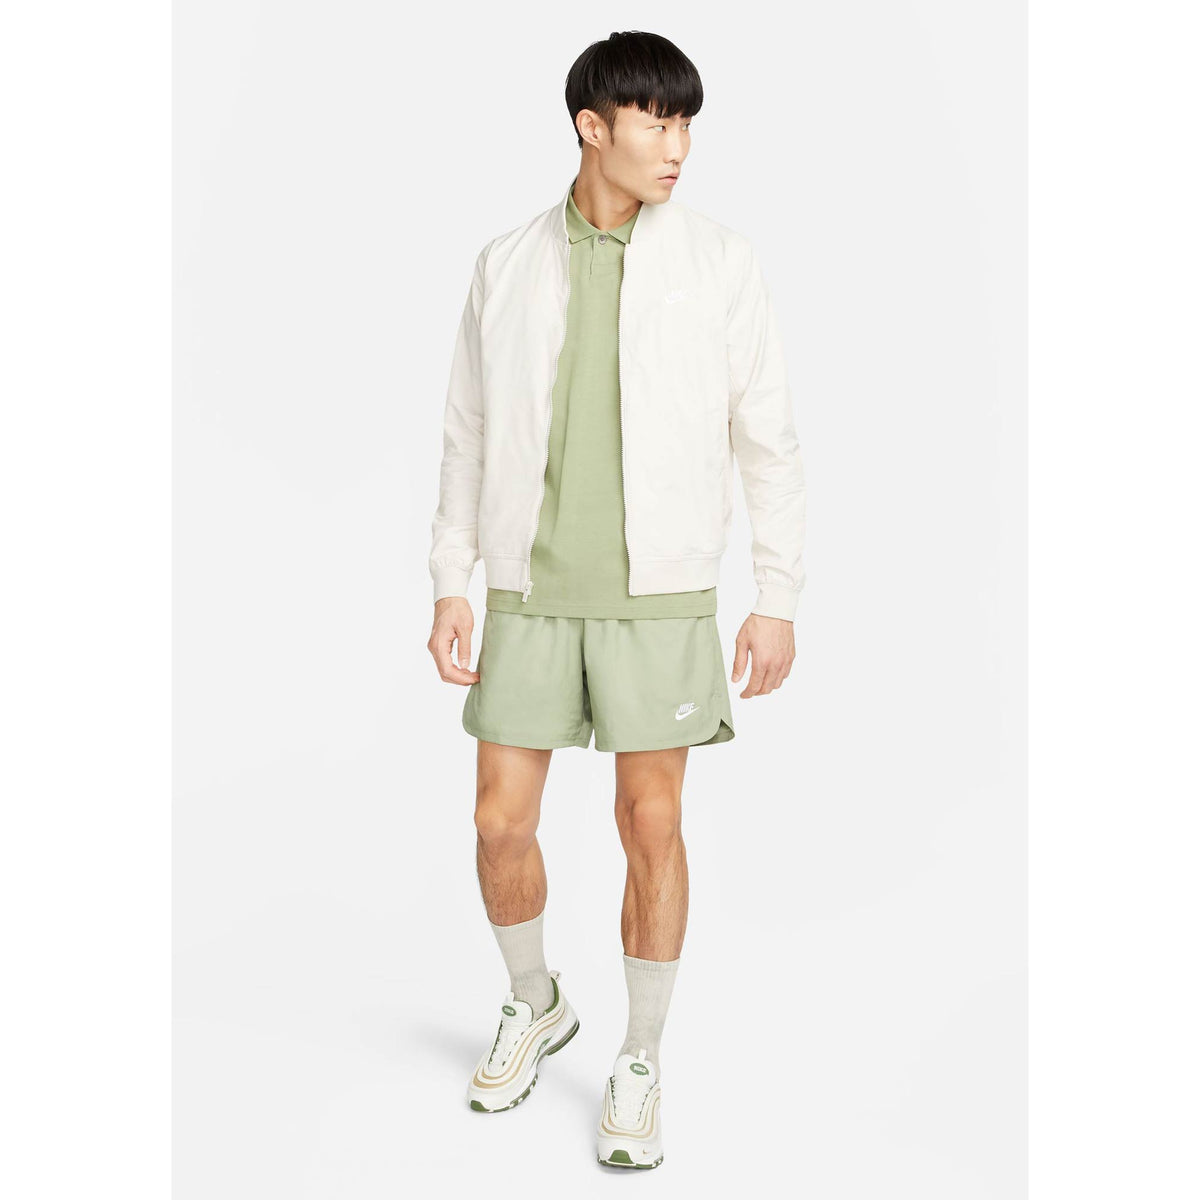 Nike Woven Lined Flow Shorts - Oil Green/White. 100% polyester main & lining Mesh lined Elastic waistband Draw-cord fastening Side entry pockets Nike embroidery Dolphin hem Back flap pocket with key loop Style: DM6829-386.